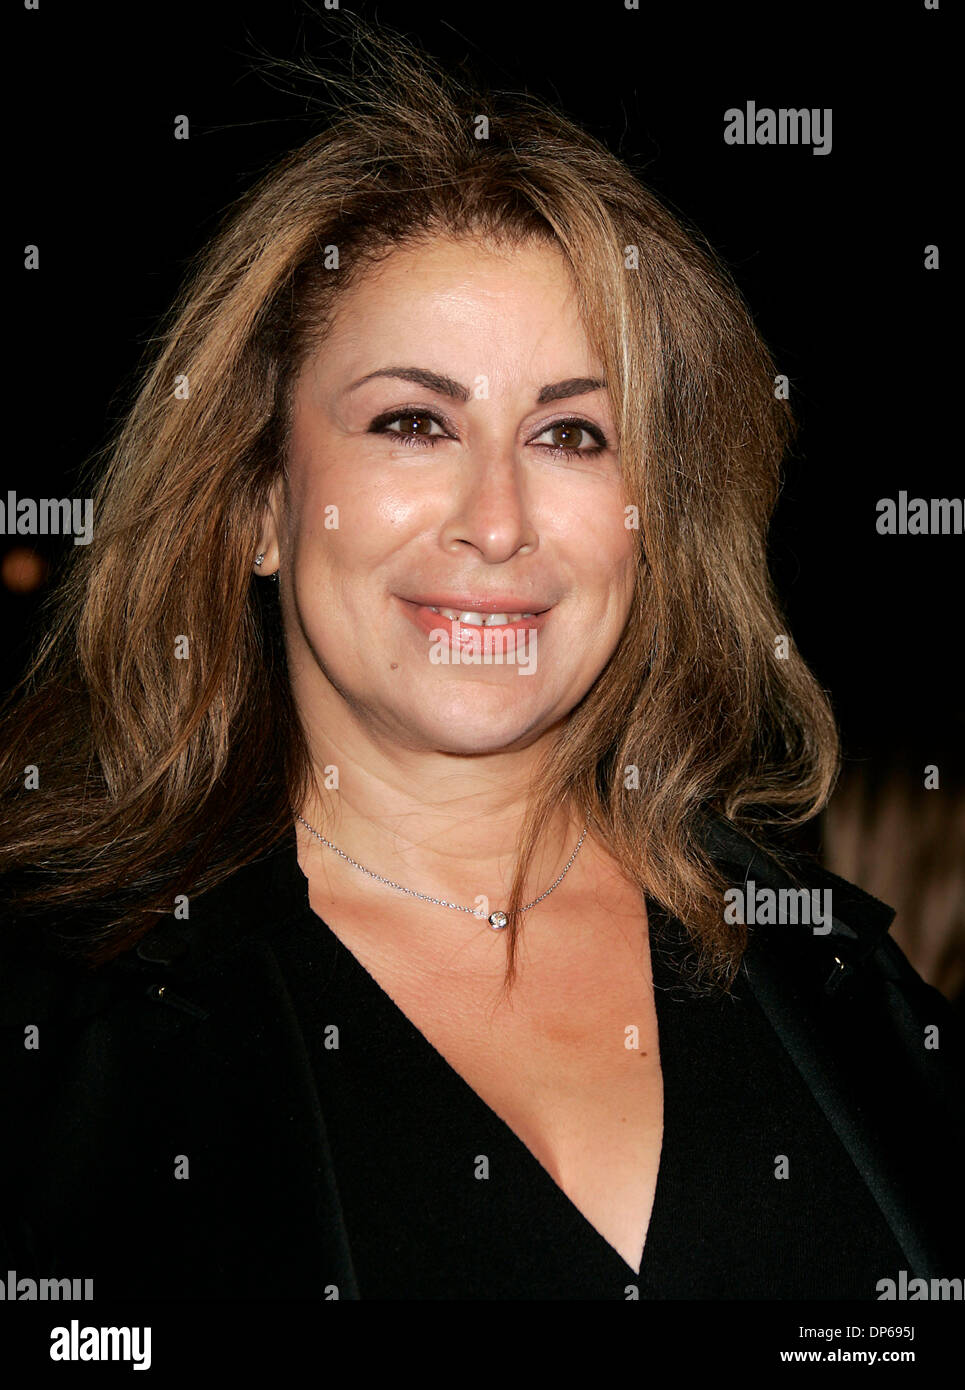 Oct 10, 2006; Beverly Hills, California, USA; Actress ROMA MAFFIA at the 'Running With Scissors' World Premiere held at the Academy of Motion Pictures Theatre. Mandatory Credit: Photo by Lisa O'Connor/ZUMA Press. (©) Copyright 2006 by Lisa O'Connor Stock Photo